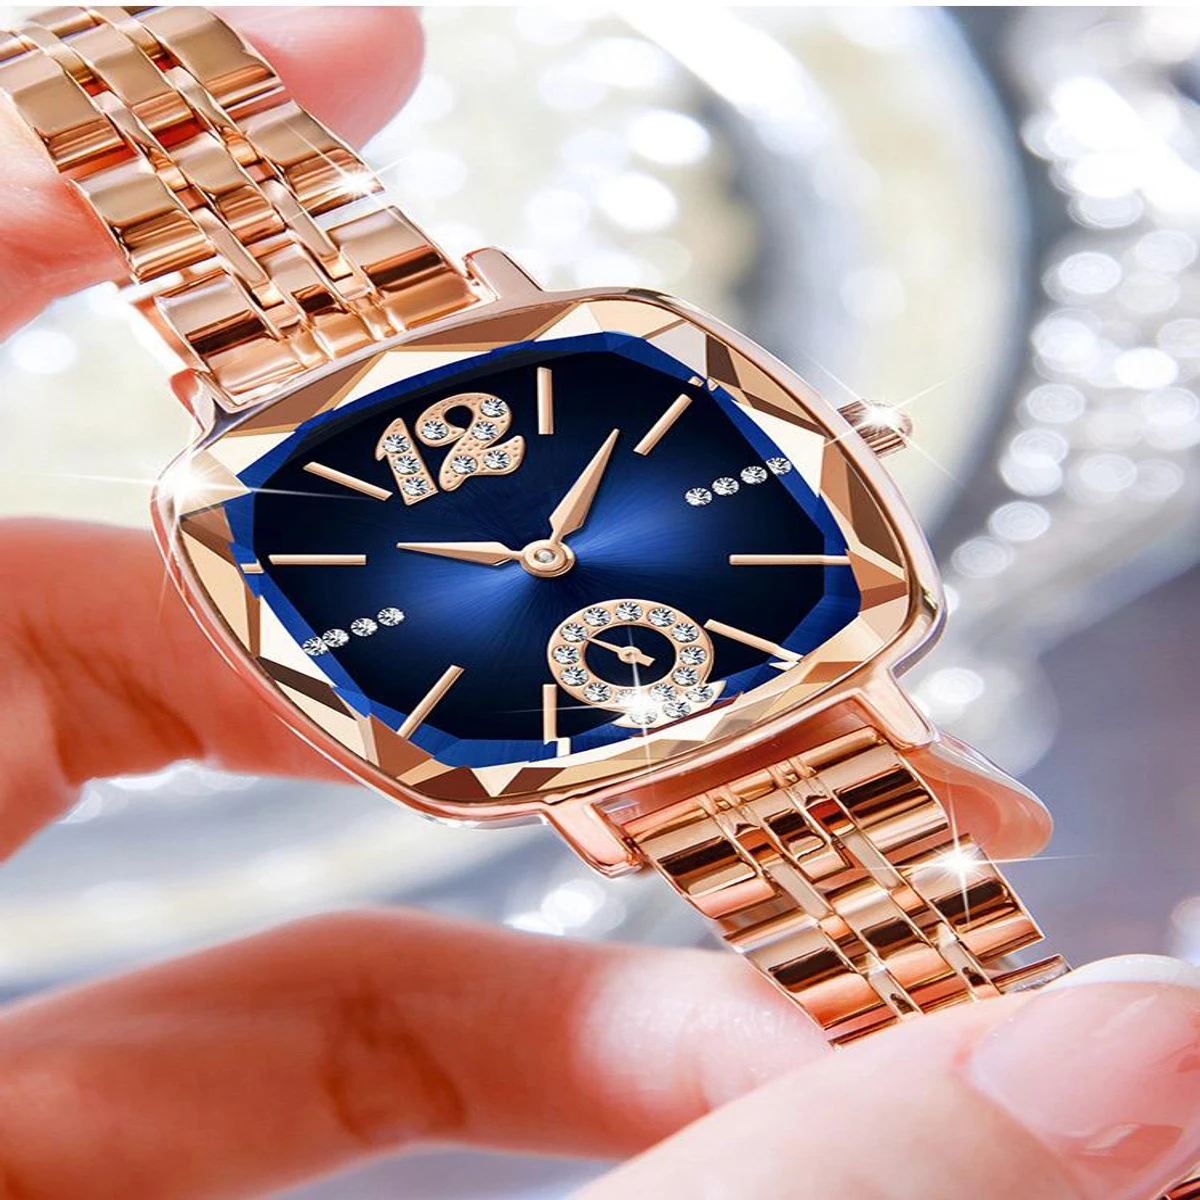 CRRJU Waterproof Ladies Wristwatch with Sparkling Rhinestone Dial and Stainless Steel Band- Golden Blue